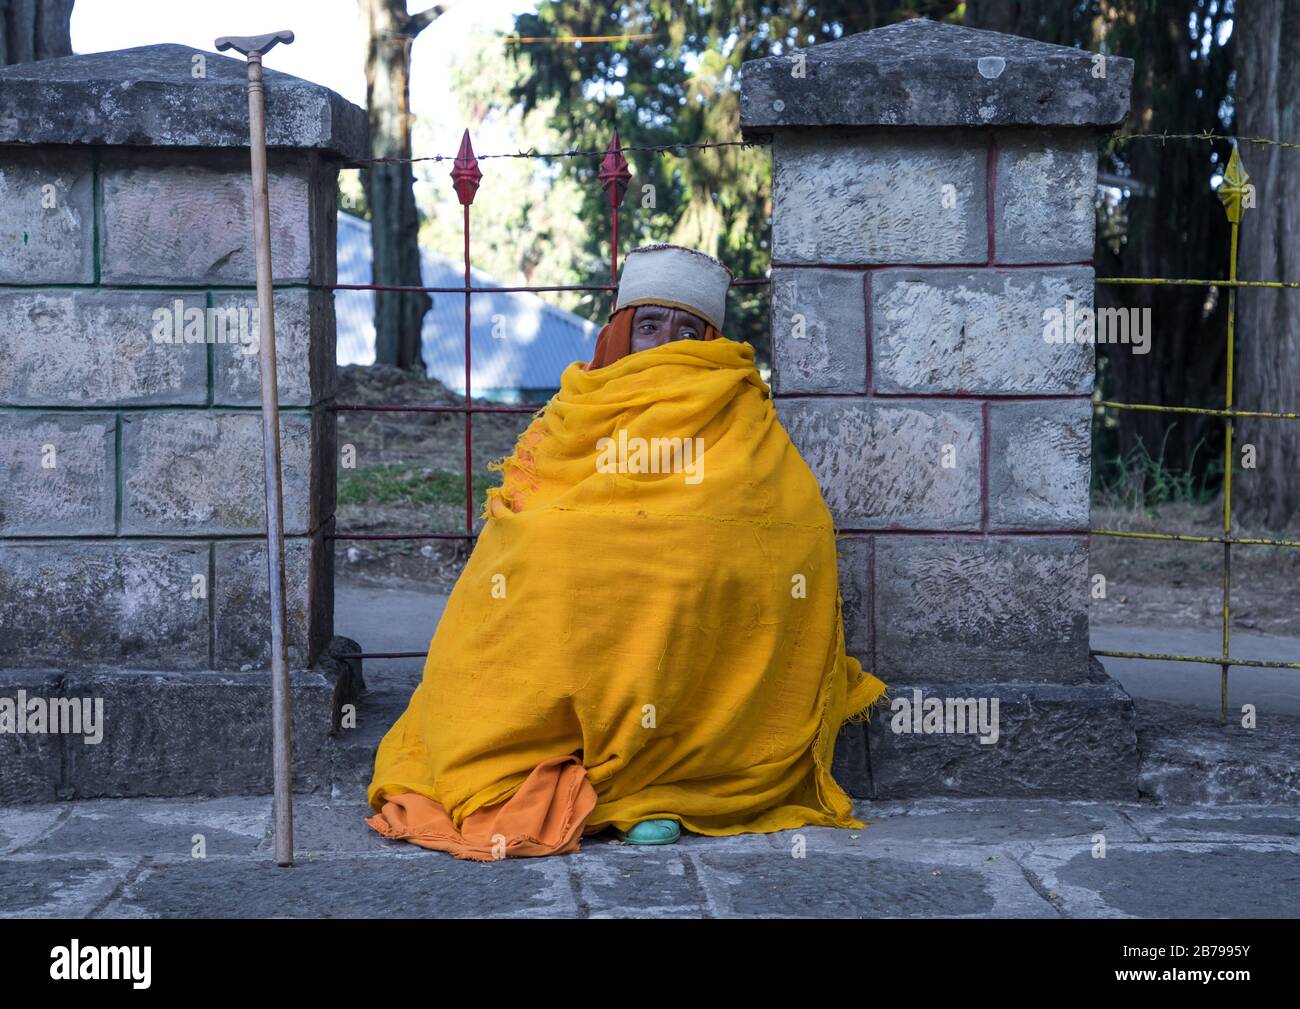 Priest covered in an yellow shawl in Entoto orthodox Maryam Church, Addis Ababa Region, Addis Ababa, Ethiopia Stock Photo